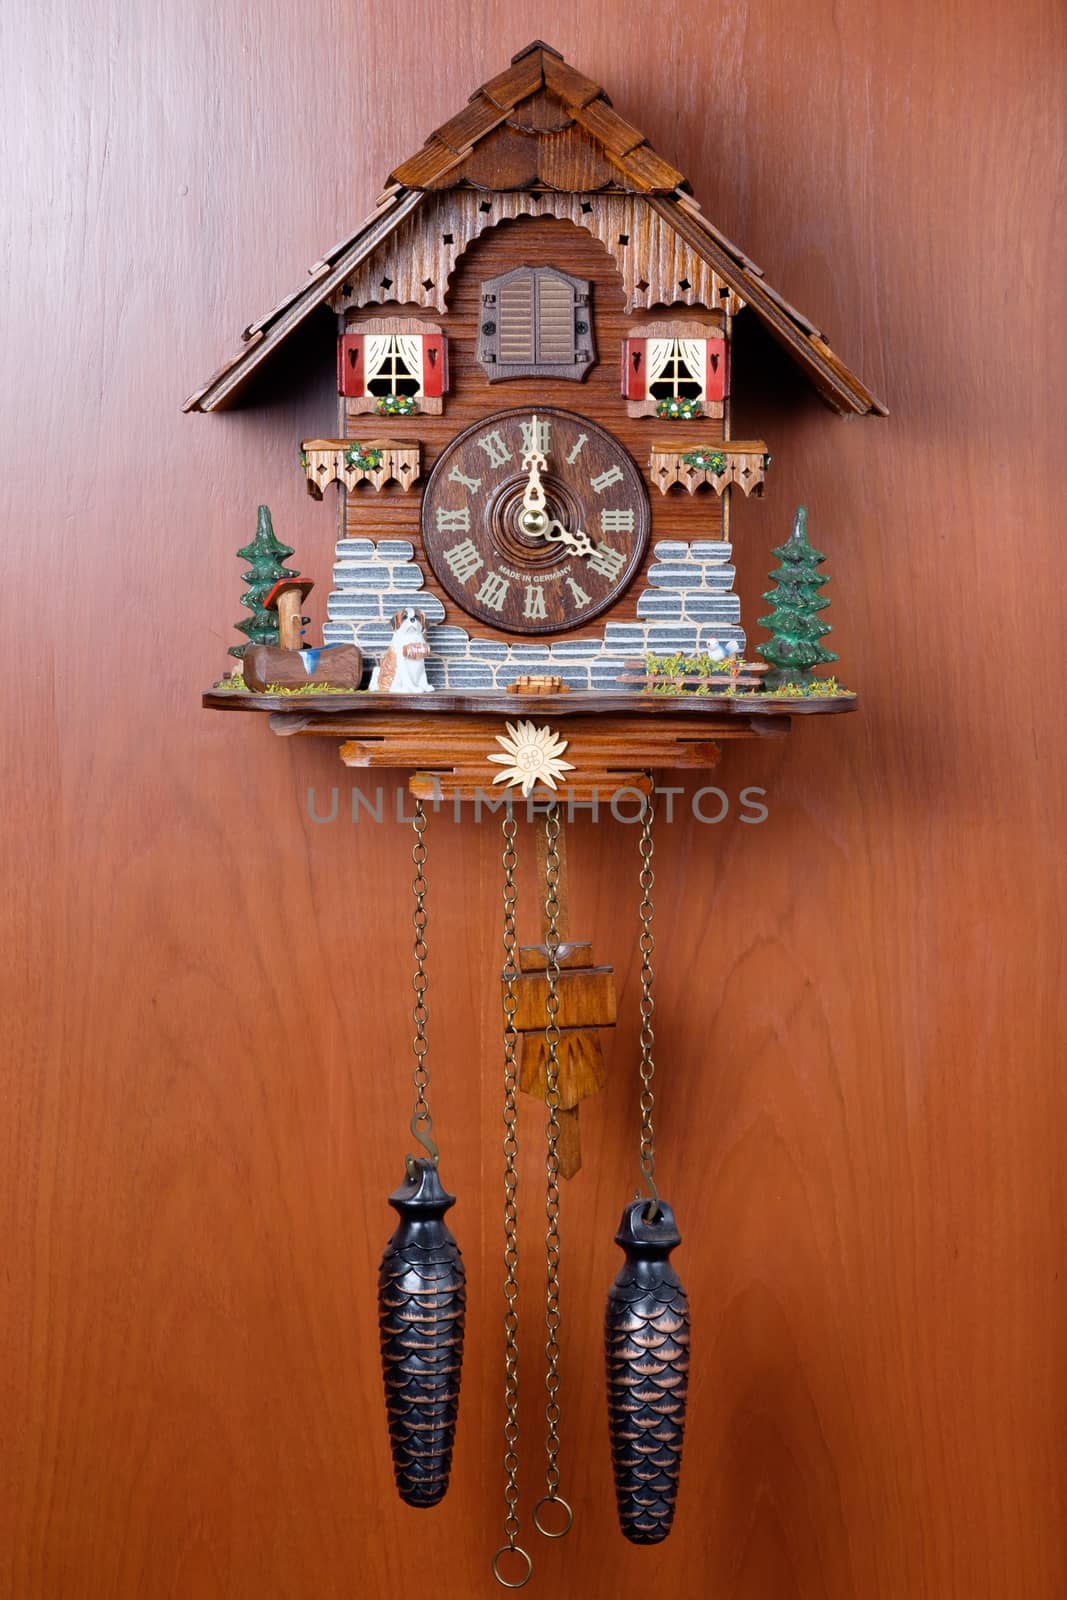 Cuckoo clock with birdie by zneb076